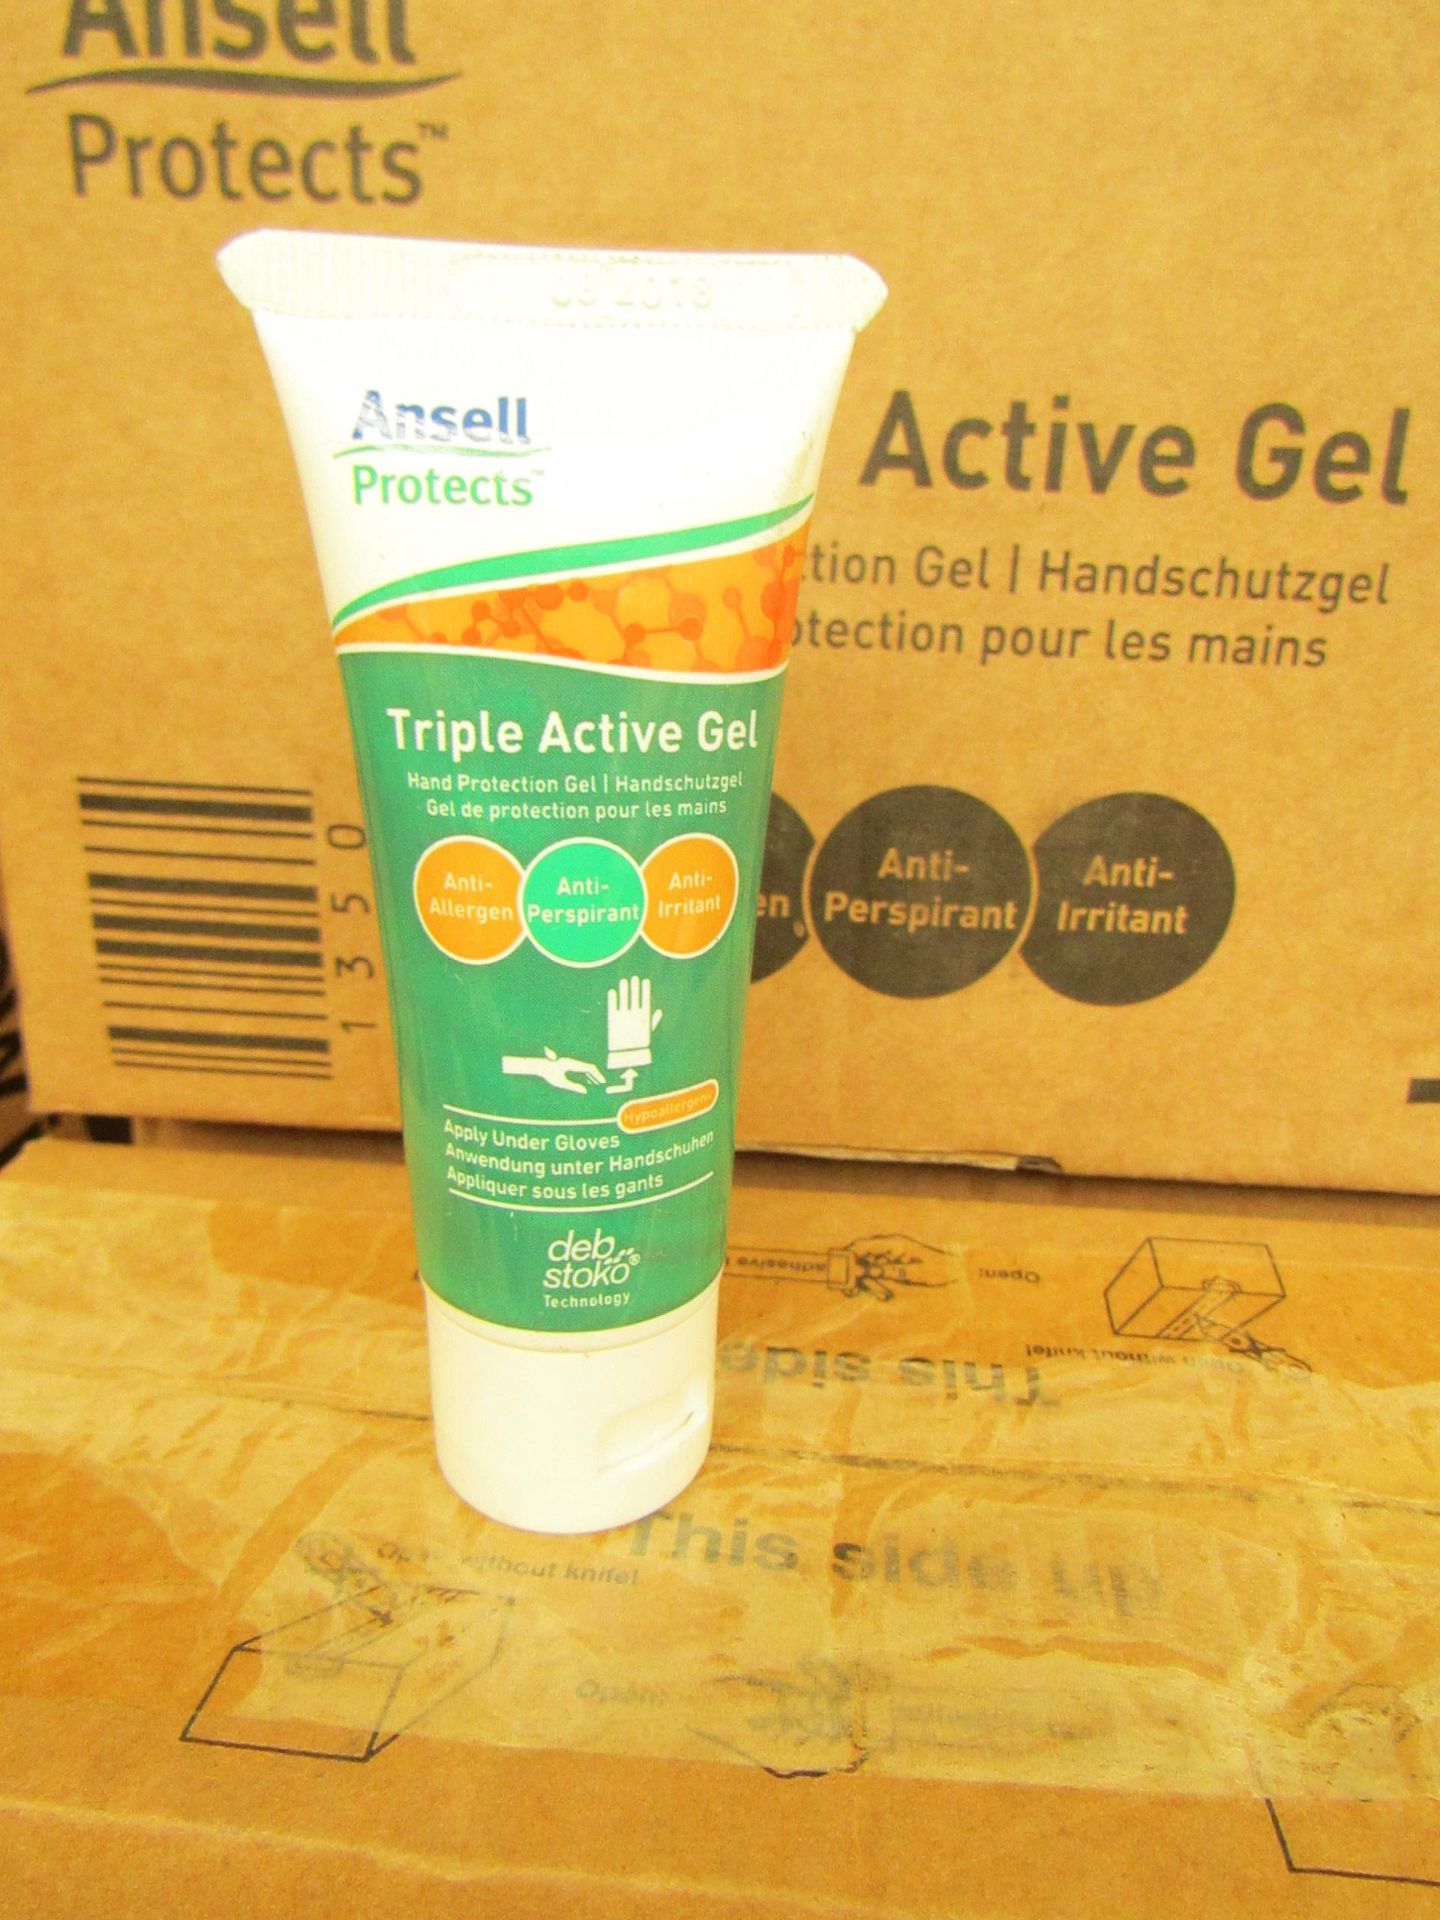 30 x 30ml Ansell Protects triple active gel hand protection gel, new and boxed.